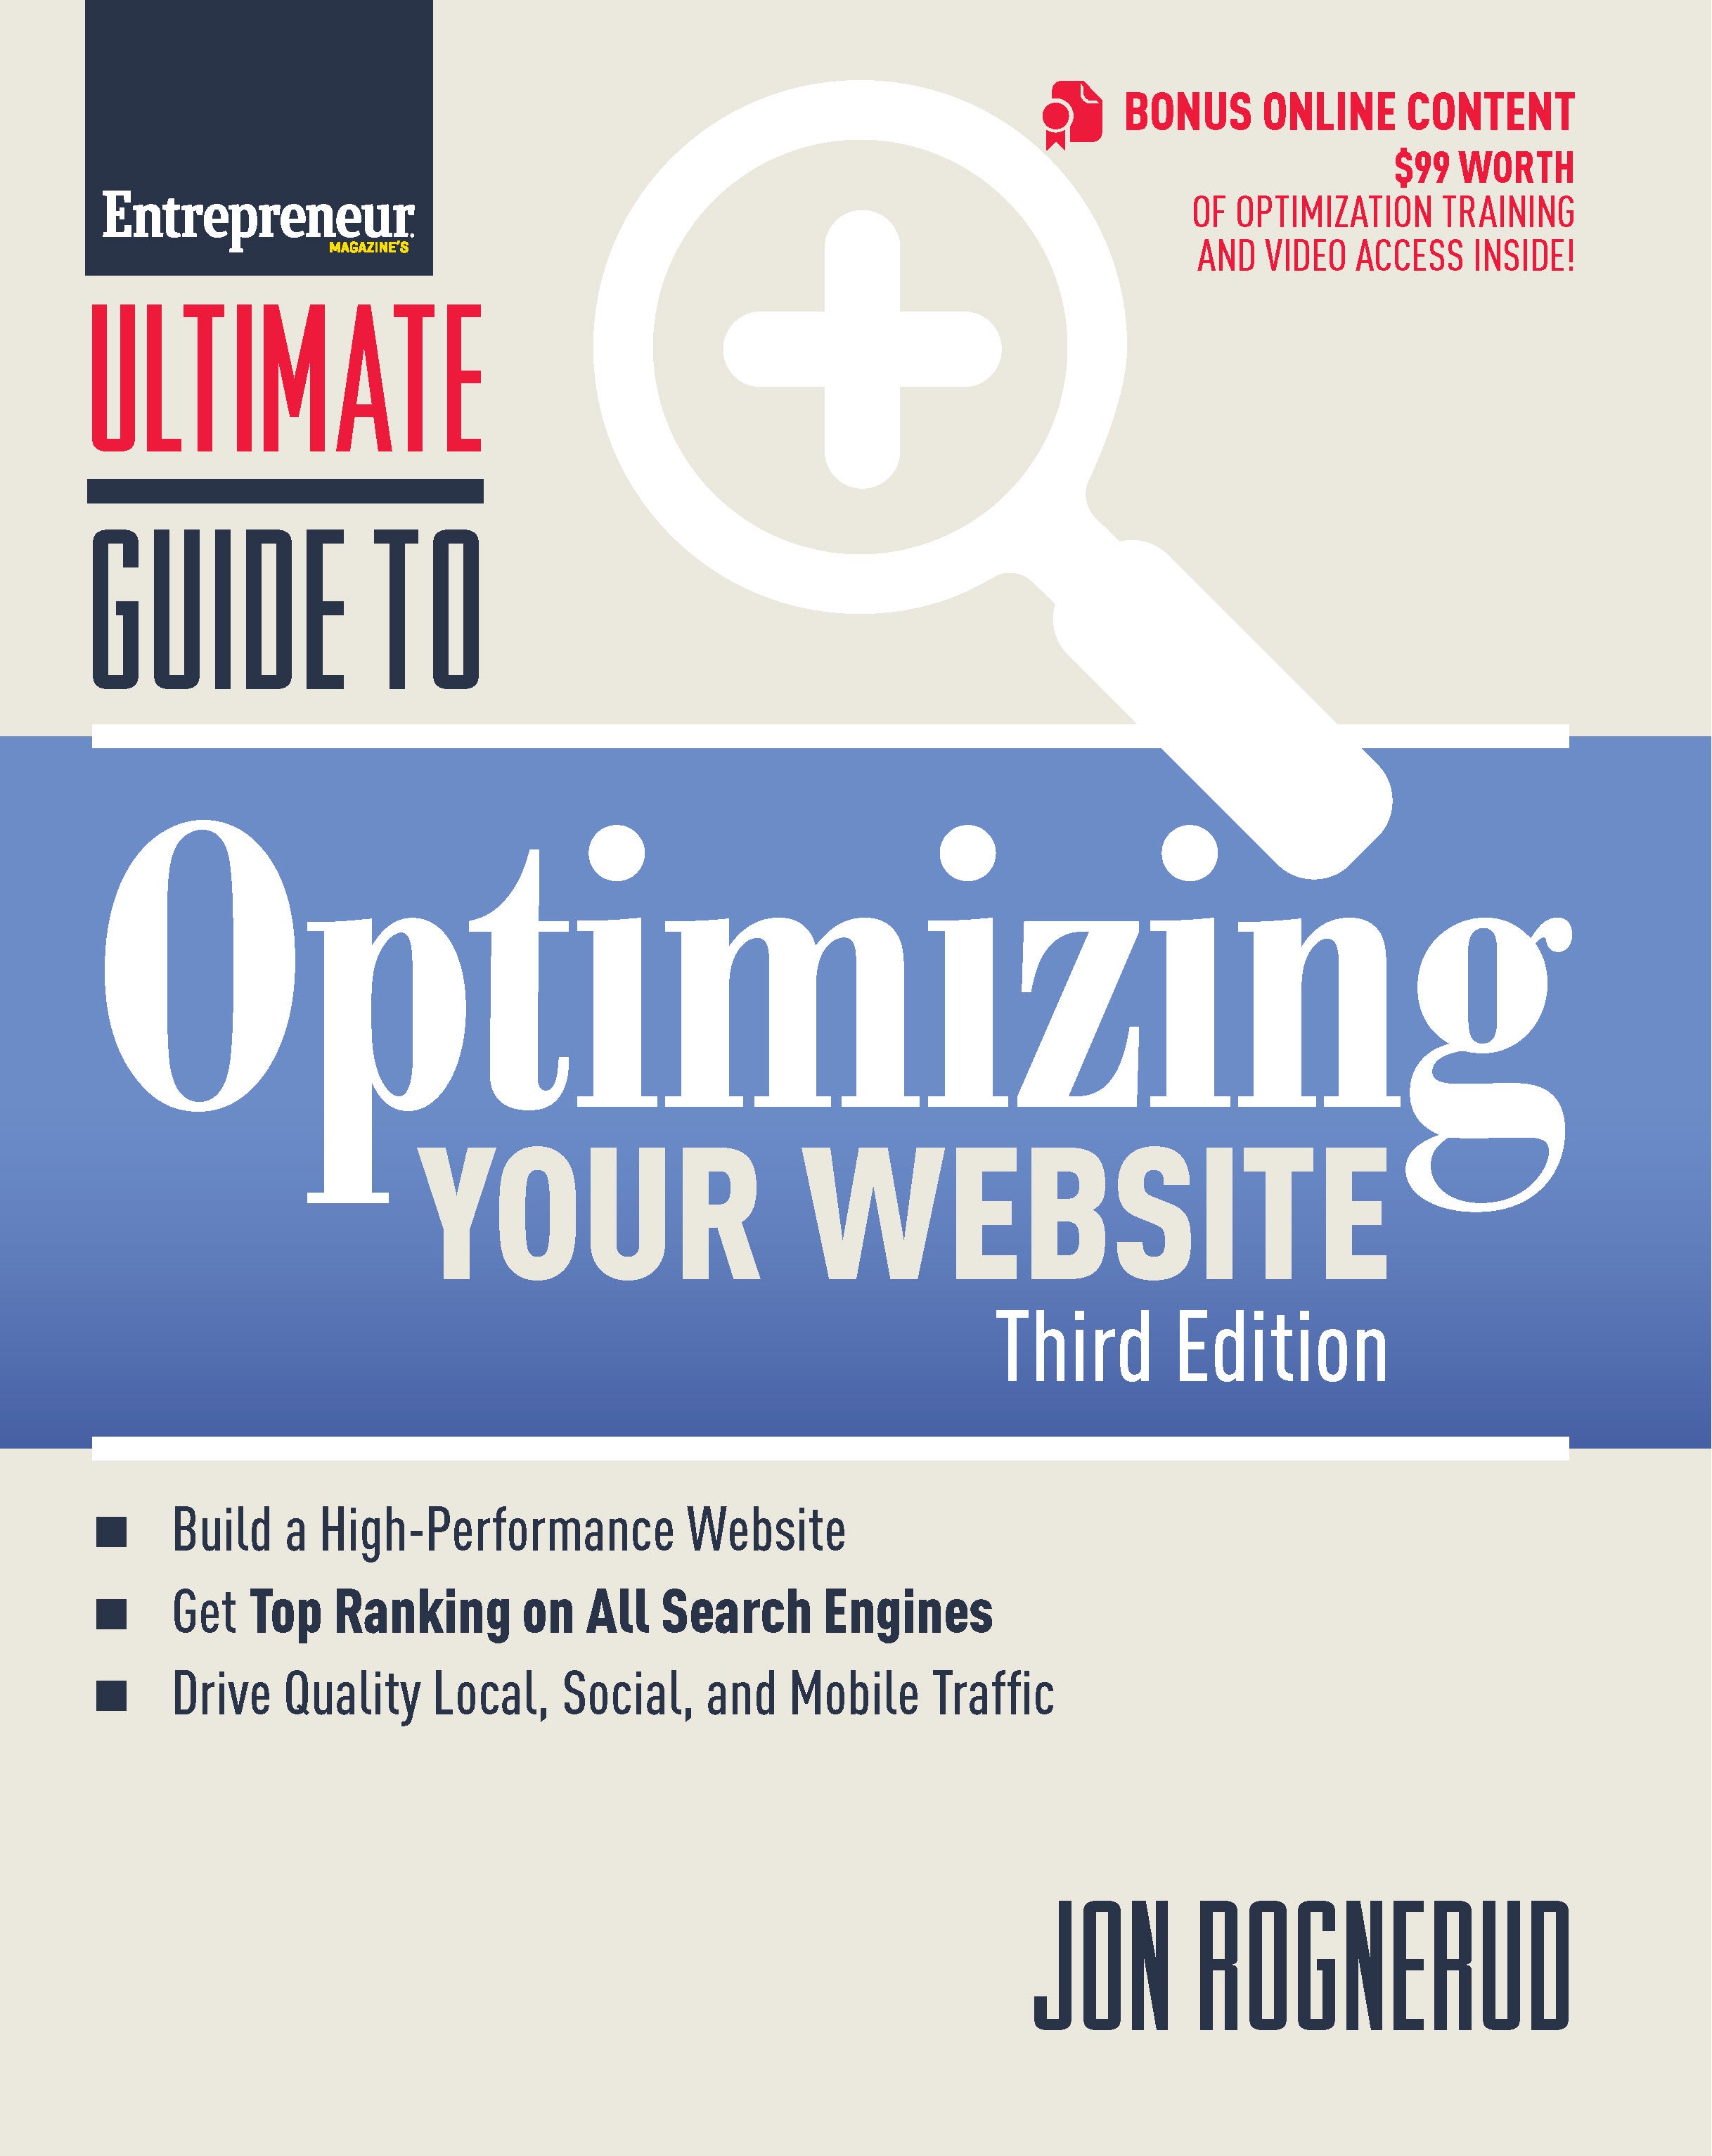 Ultimate Guide to Optimizing Your Website, 3rd Edition